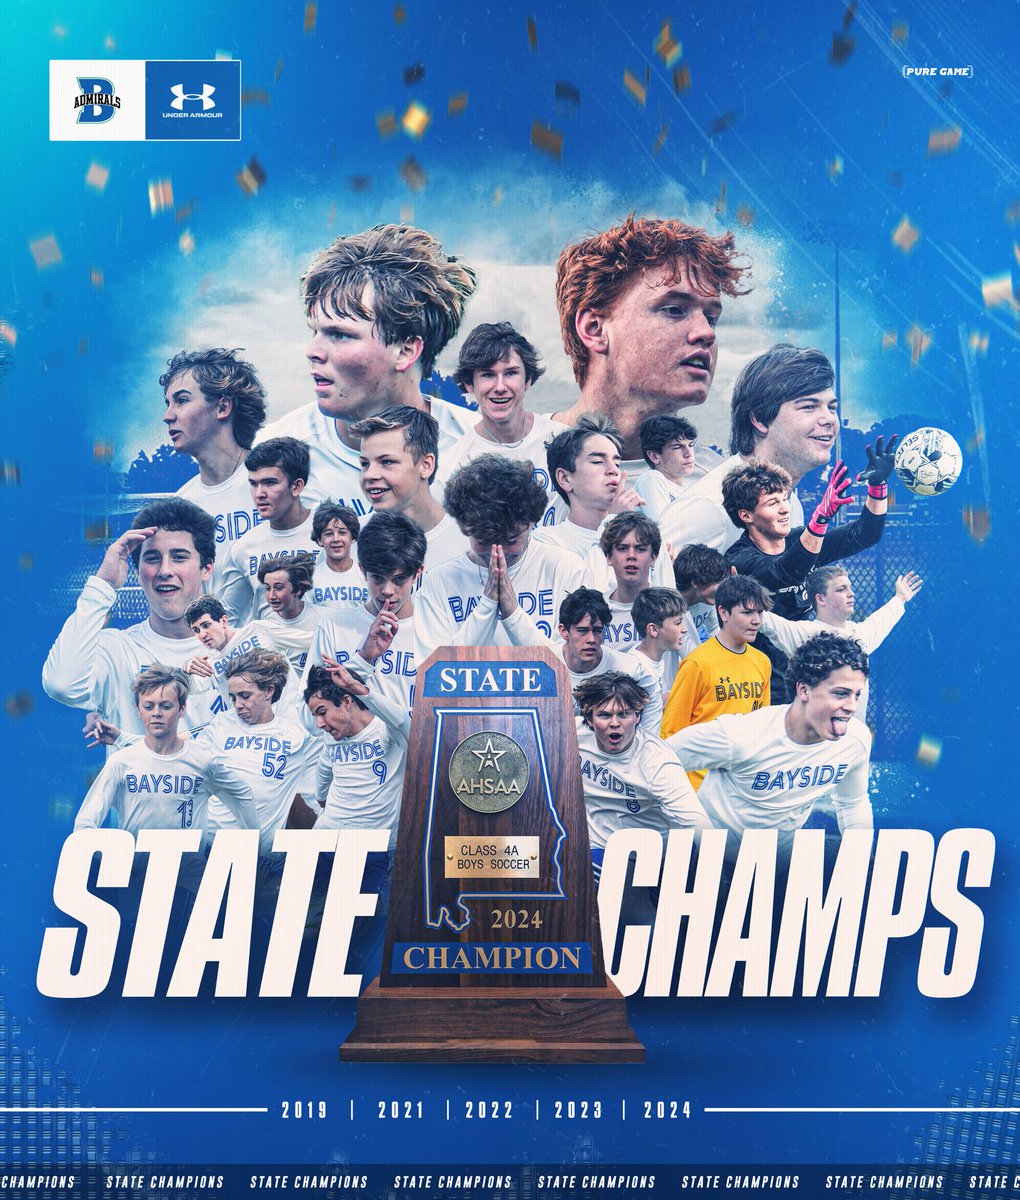 🏆 BAYSIDE BOYS SOCCER ⚽️ nets a 2024 4A STATE CHAMPIONSHIP. Luke Ferguson drills two goals and is MVP. Stephen Trotter adds a goal late to give the Admirals a 3-0 victory over Mars Hill Bible. Absolutely clinical performance by Coach Jamie Ferguson and the Admirals.